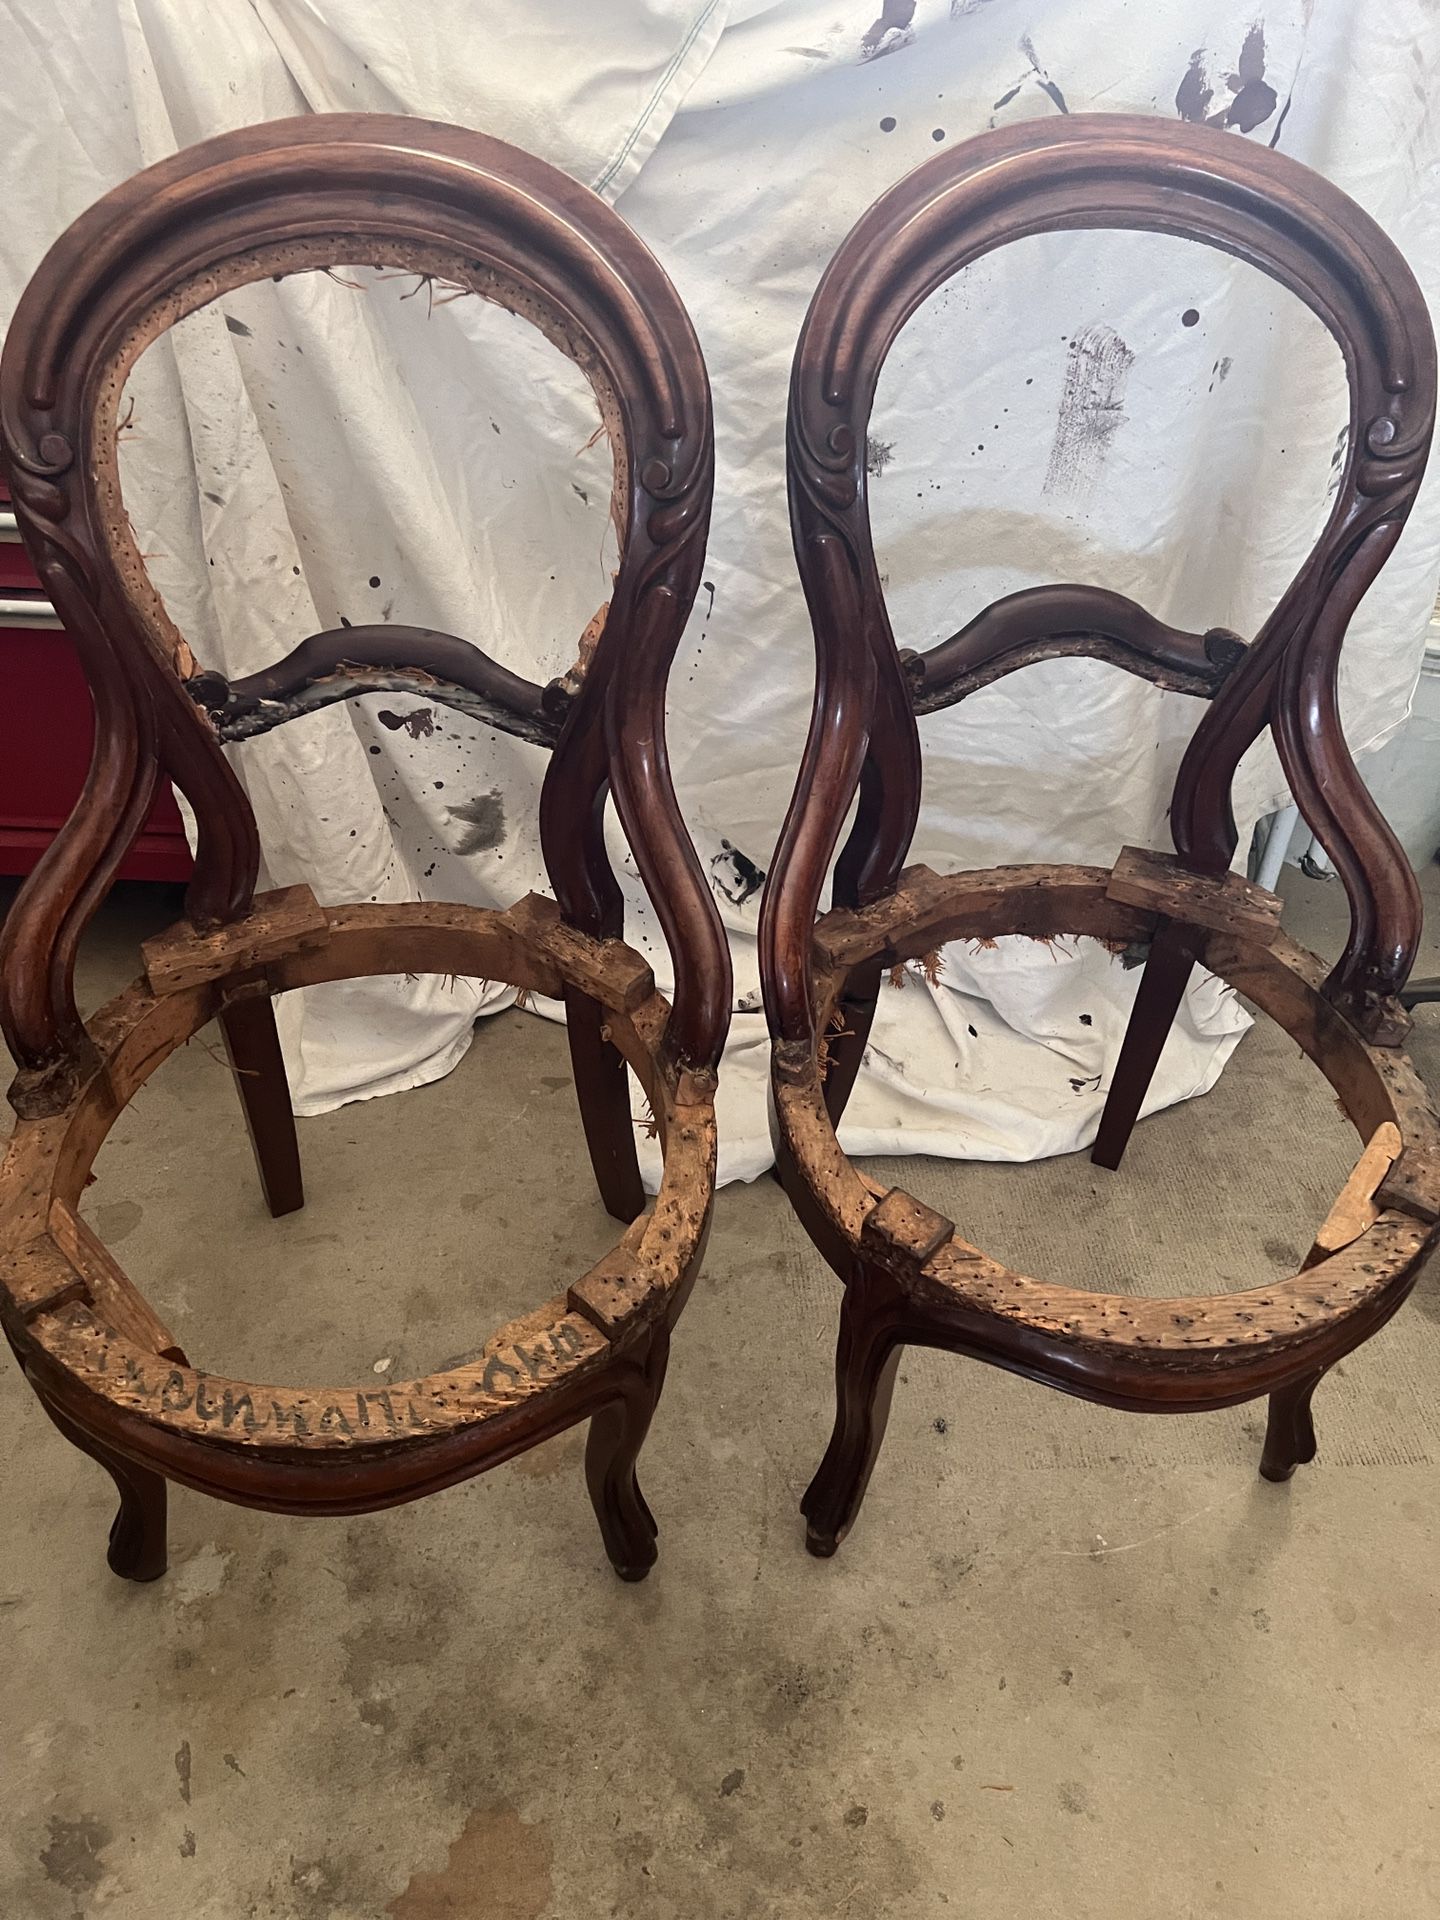 Two Antique Parlor Chairs FREE